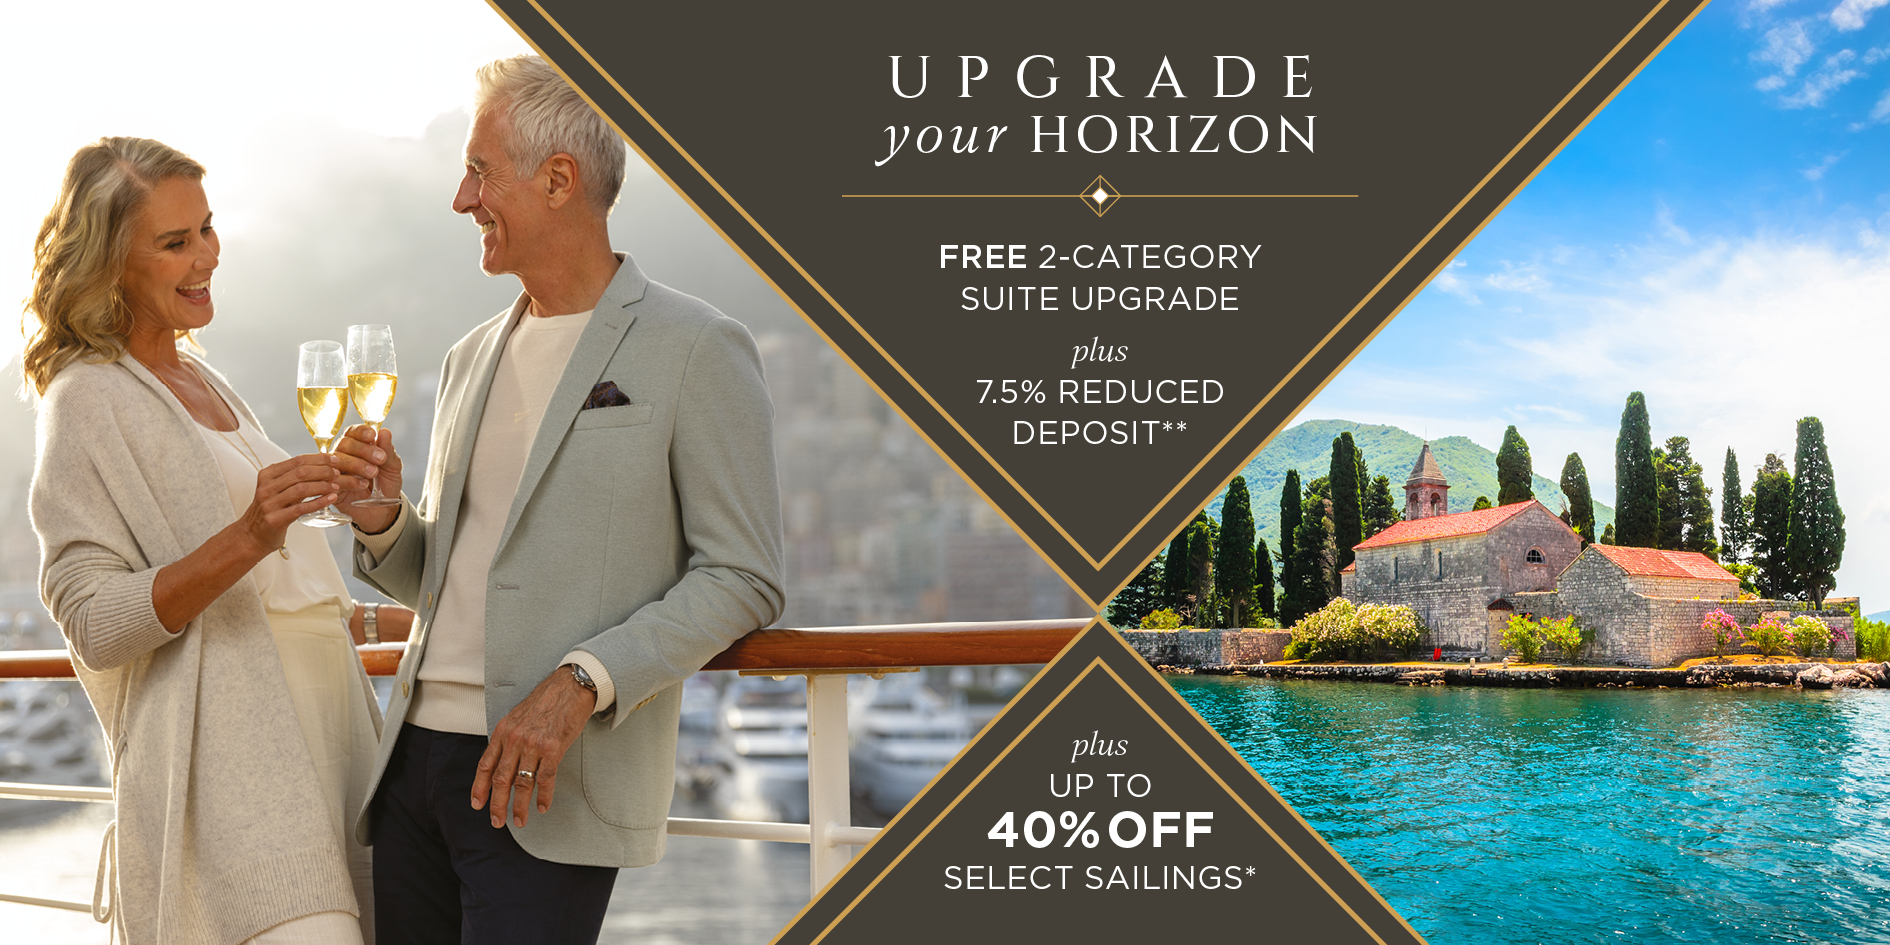 Book a voyage on Regent Seven Seas Cruises and receive a Free two-category suite upgrade